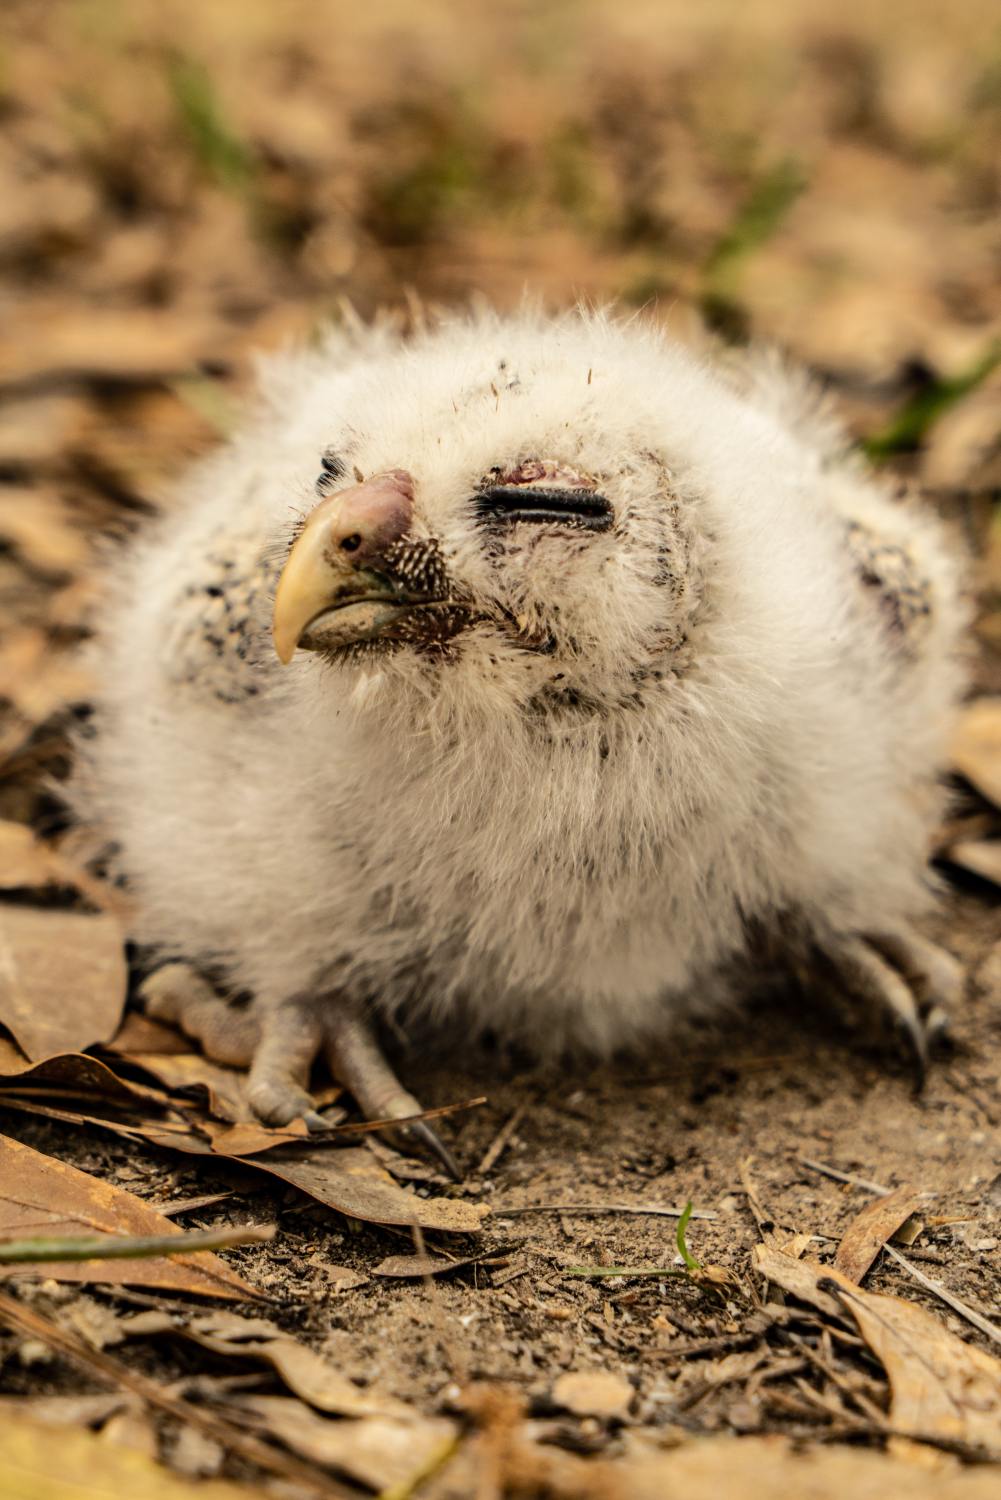 10 facts about baby owls you never knew before